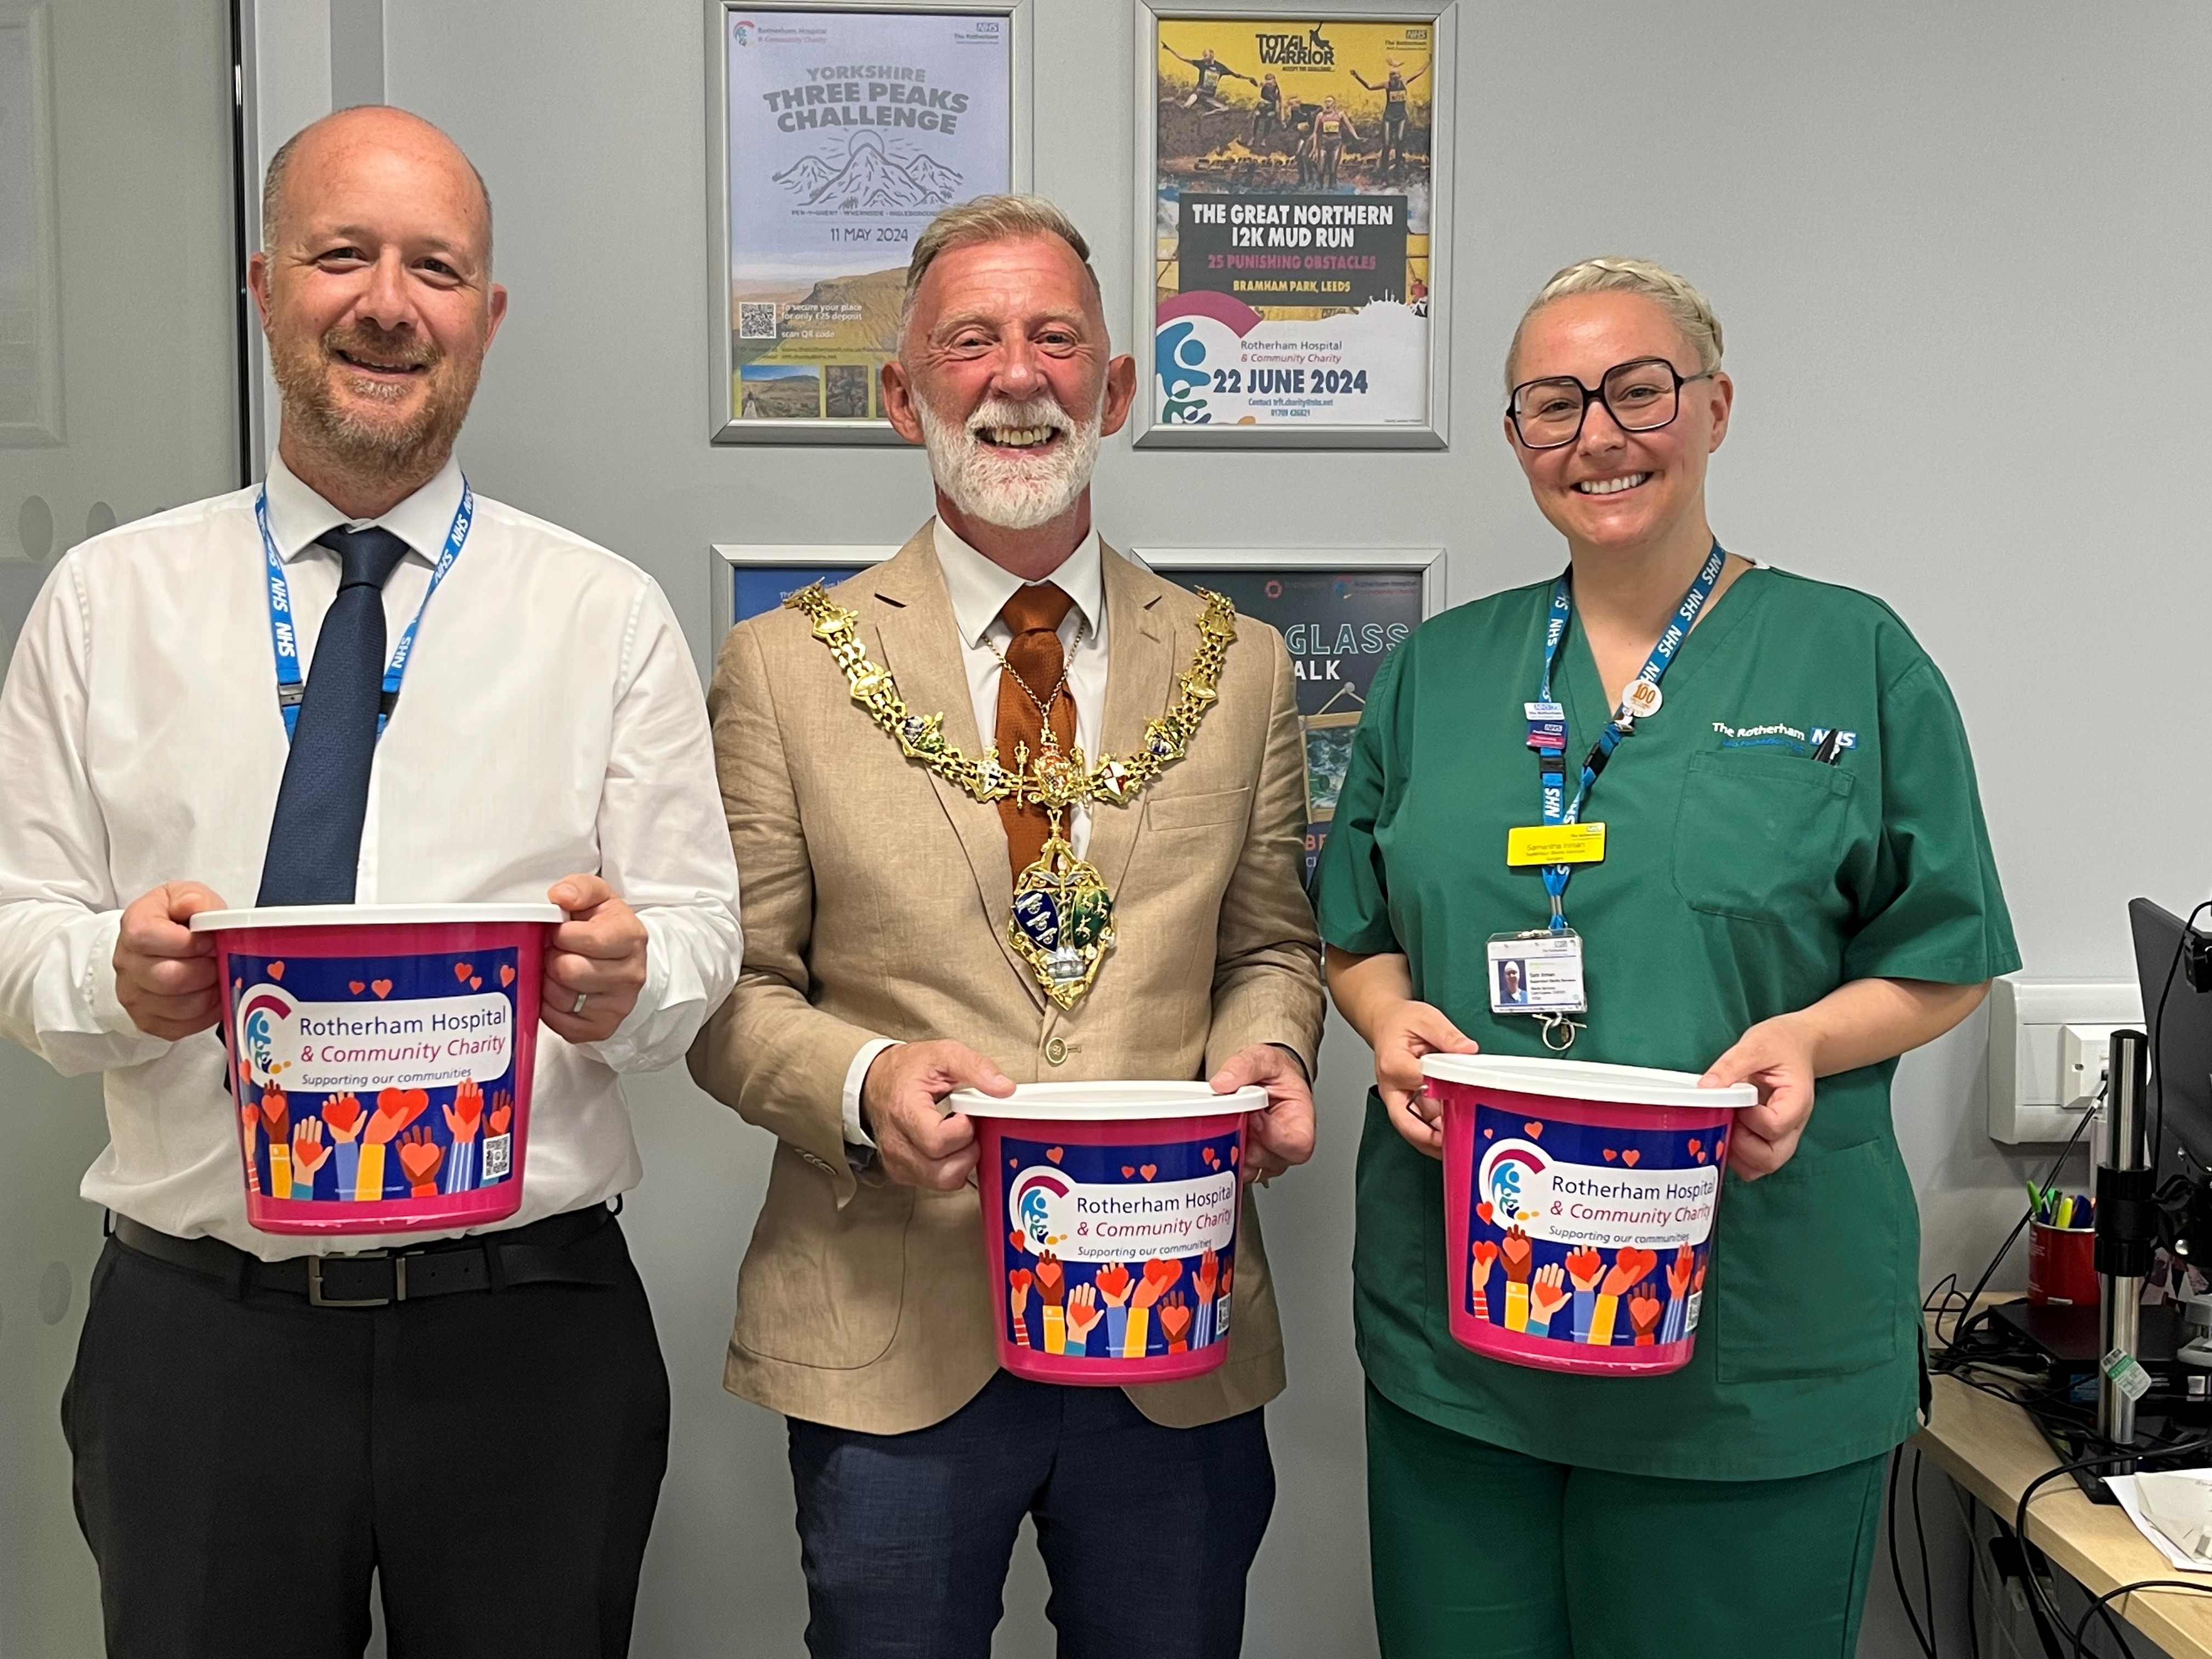 Daniel Hartley, the Mayor of Rotherham and Samantha Inman holding charity collection buckets